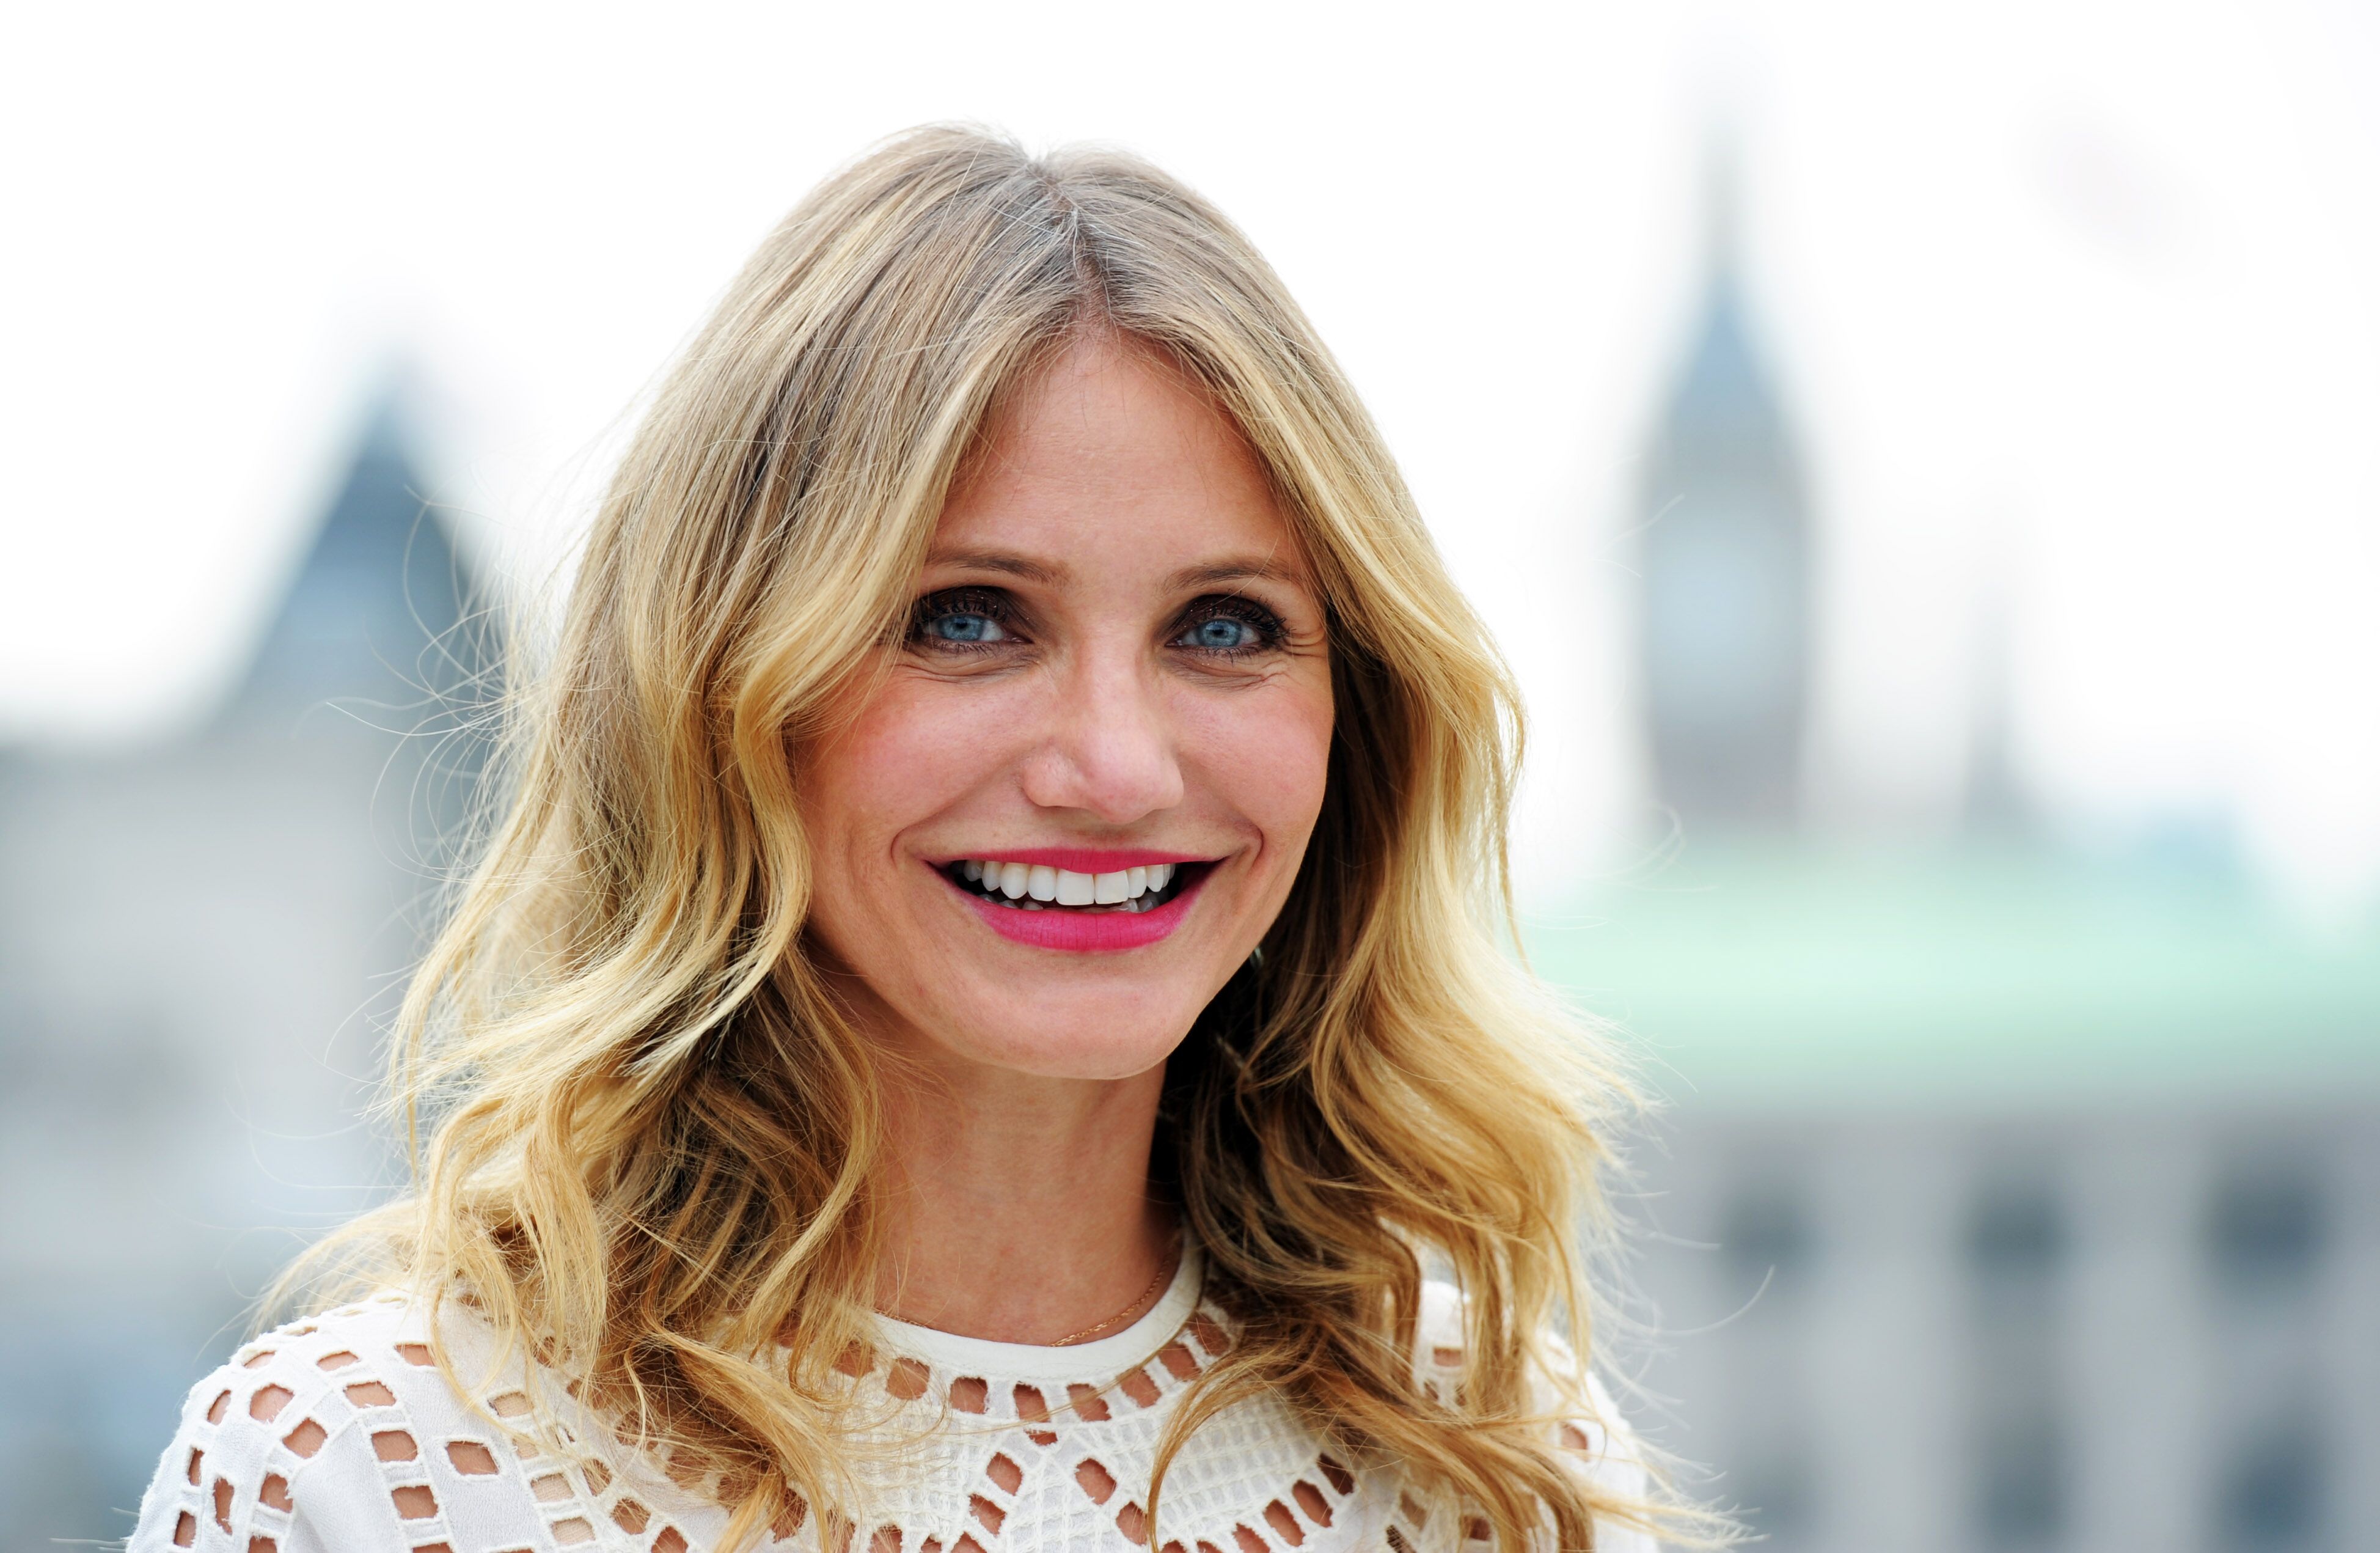 Cameron Diaz, Fotoshooting, 2014 in London | Quelle: Getty Images